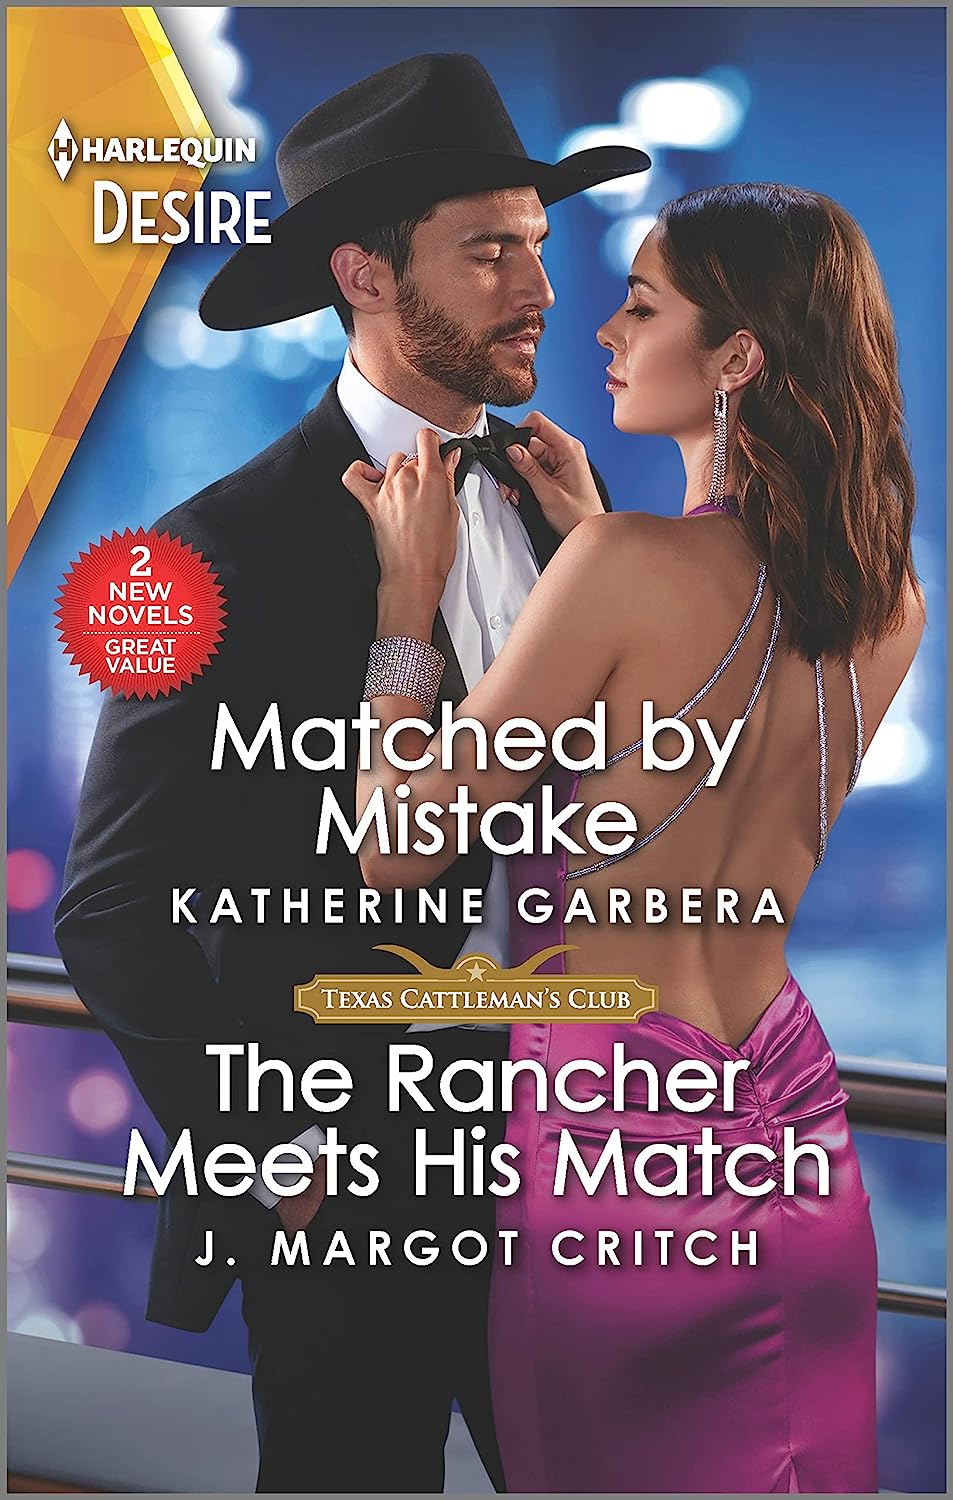 Matched by Mistake & The Rancher Meets His Match